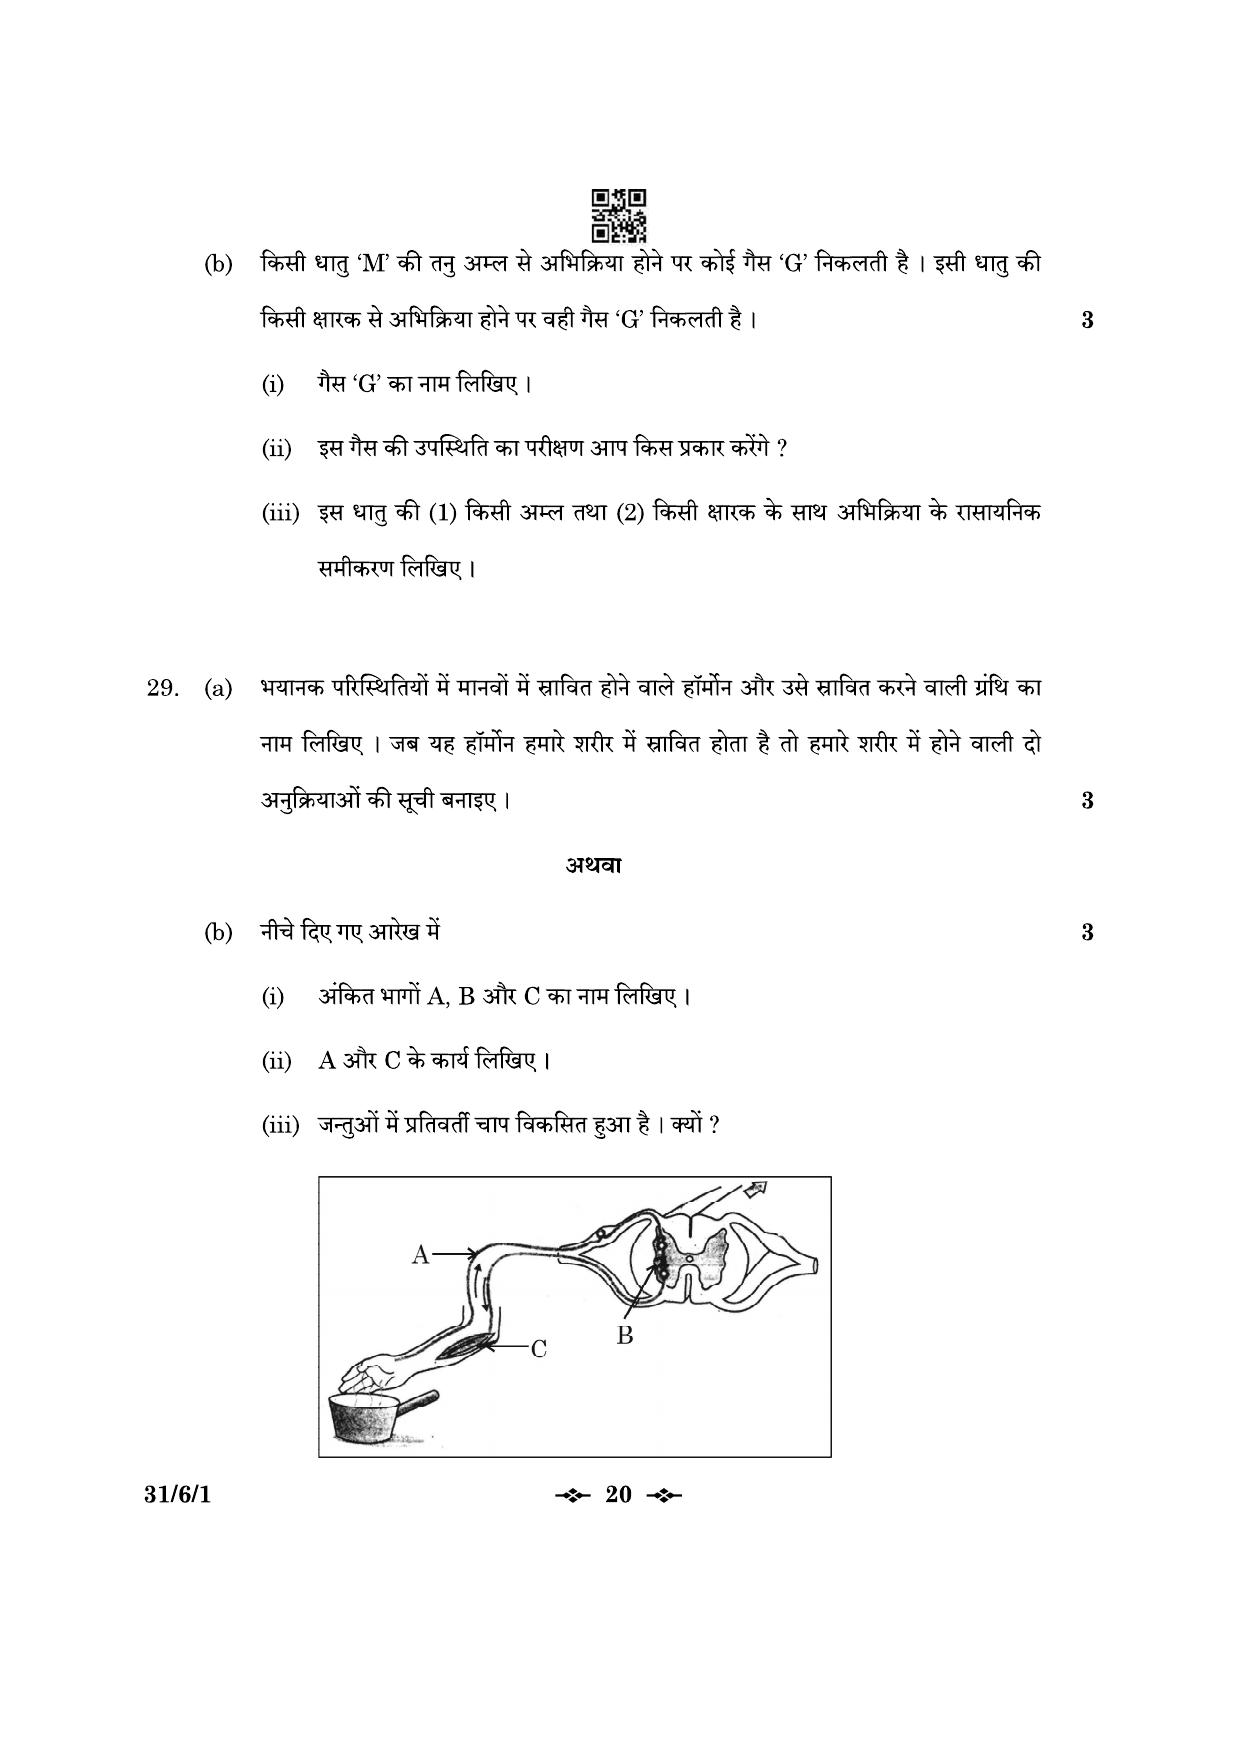 CBSE Class 10 31-6-1 Science 2023 Question Paper - Page 20